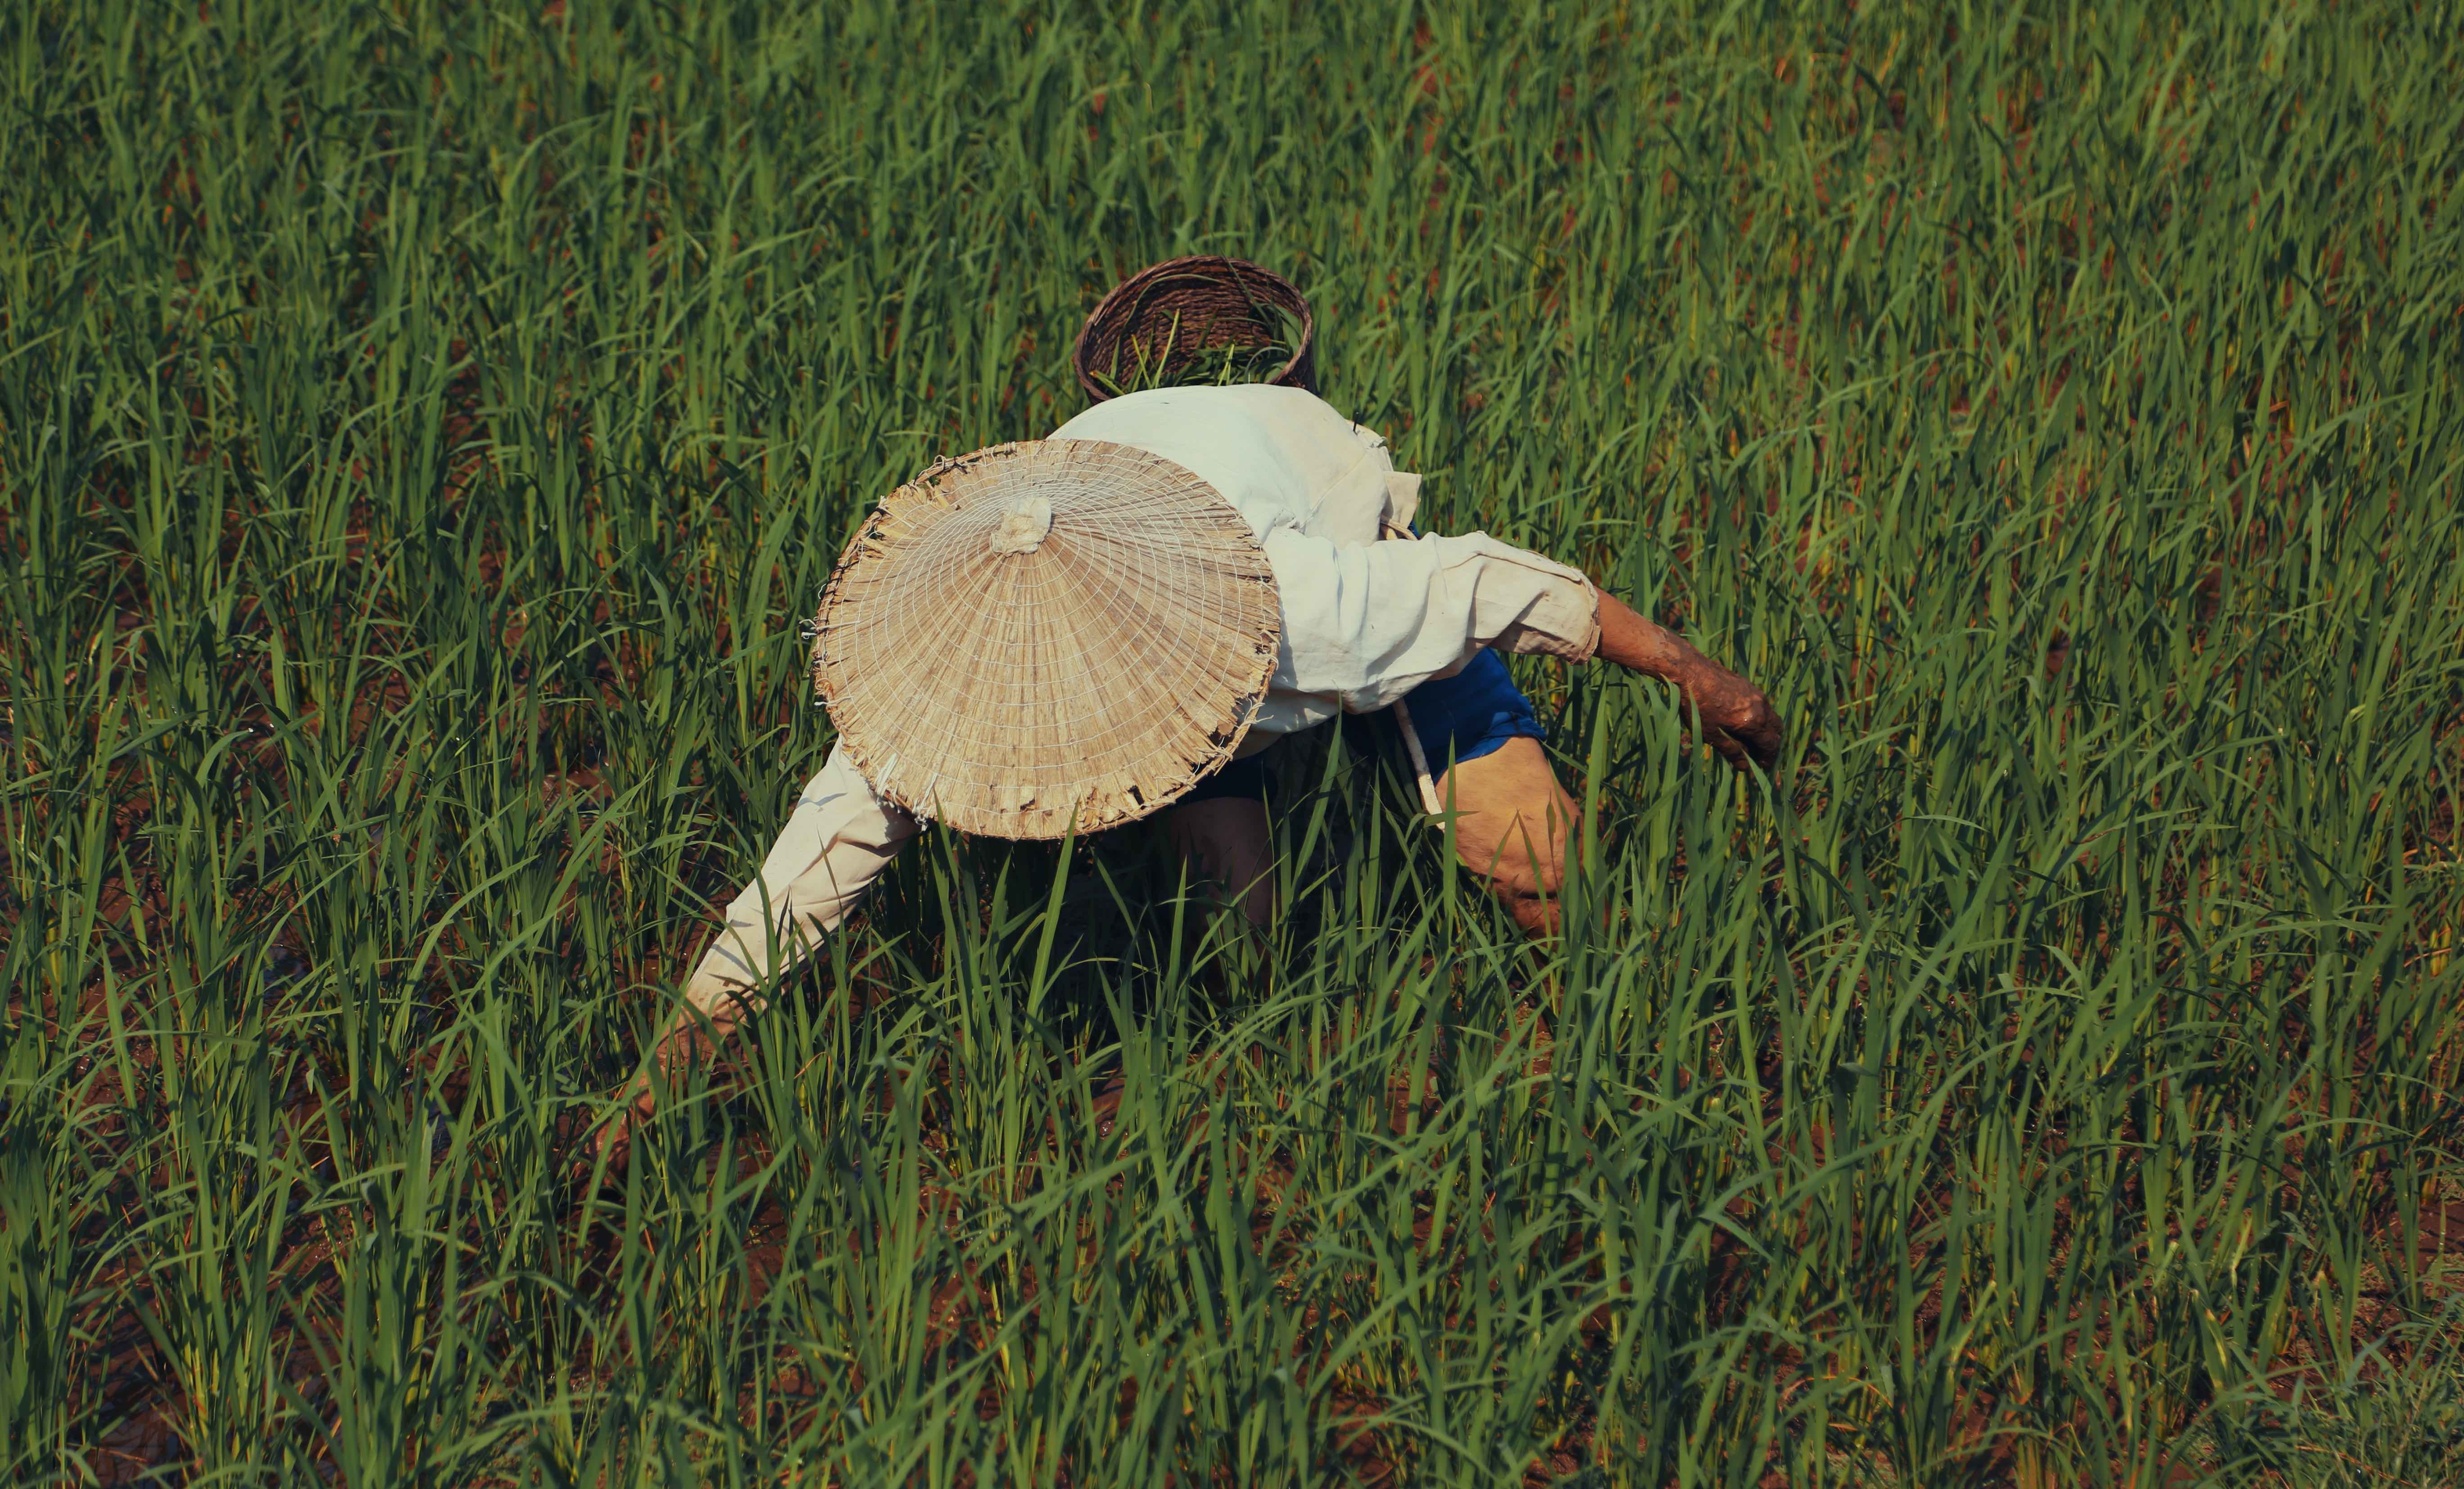 Overhead view of farmer crouching and leaning forward